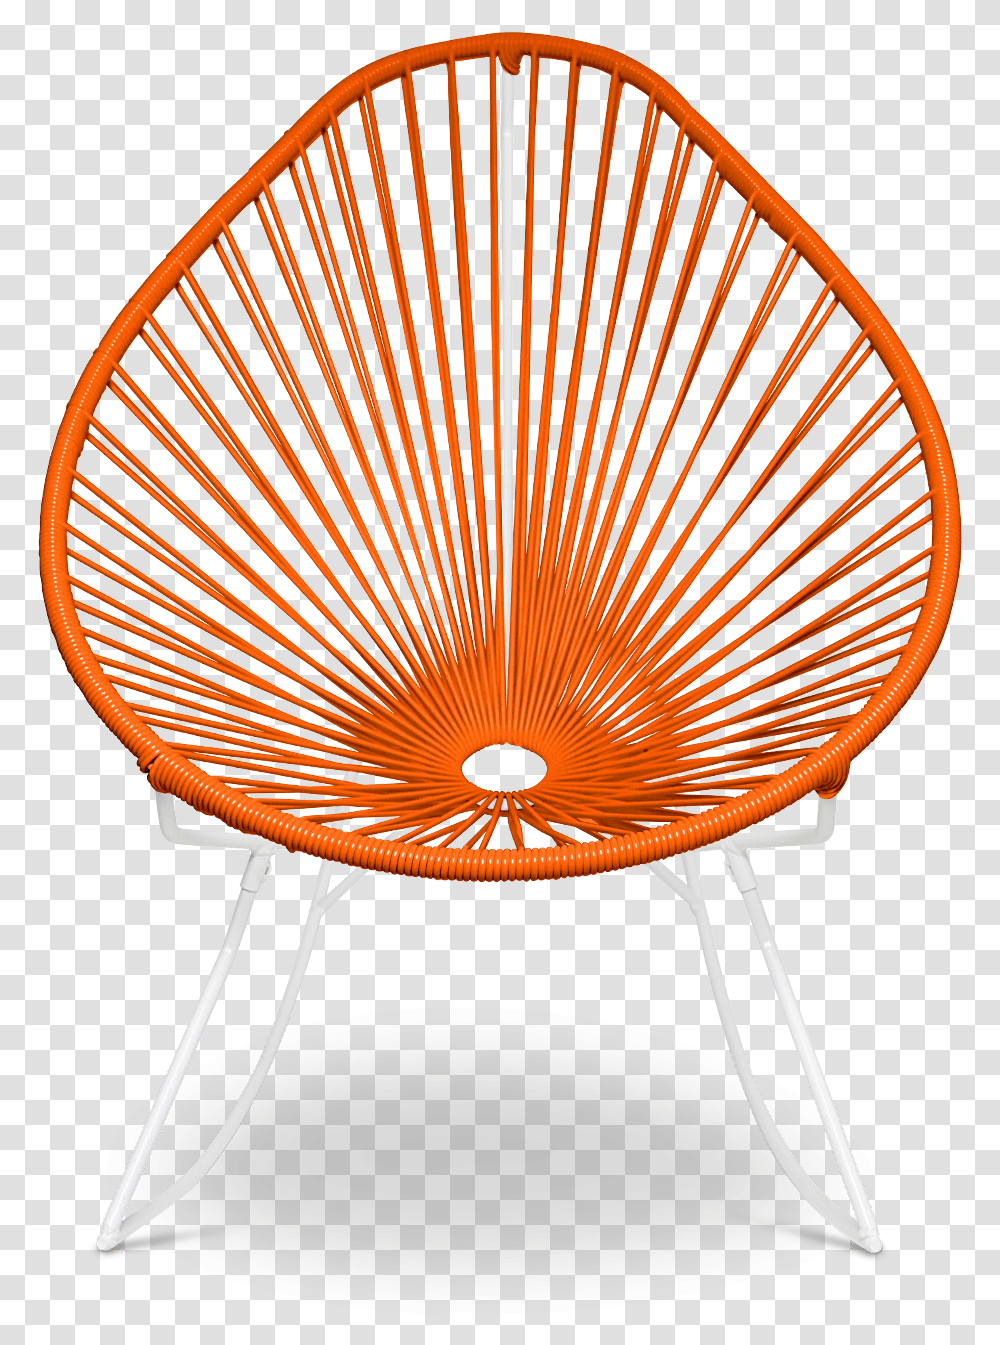 Chair, Furniture, Table, Tabletop, Coffee Table Transparent Png